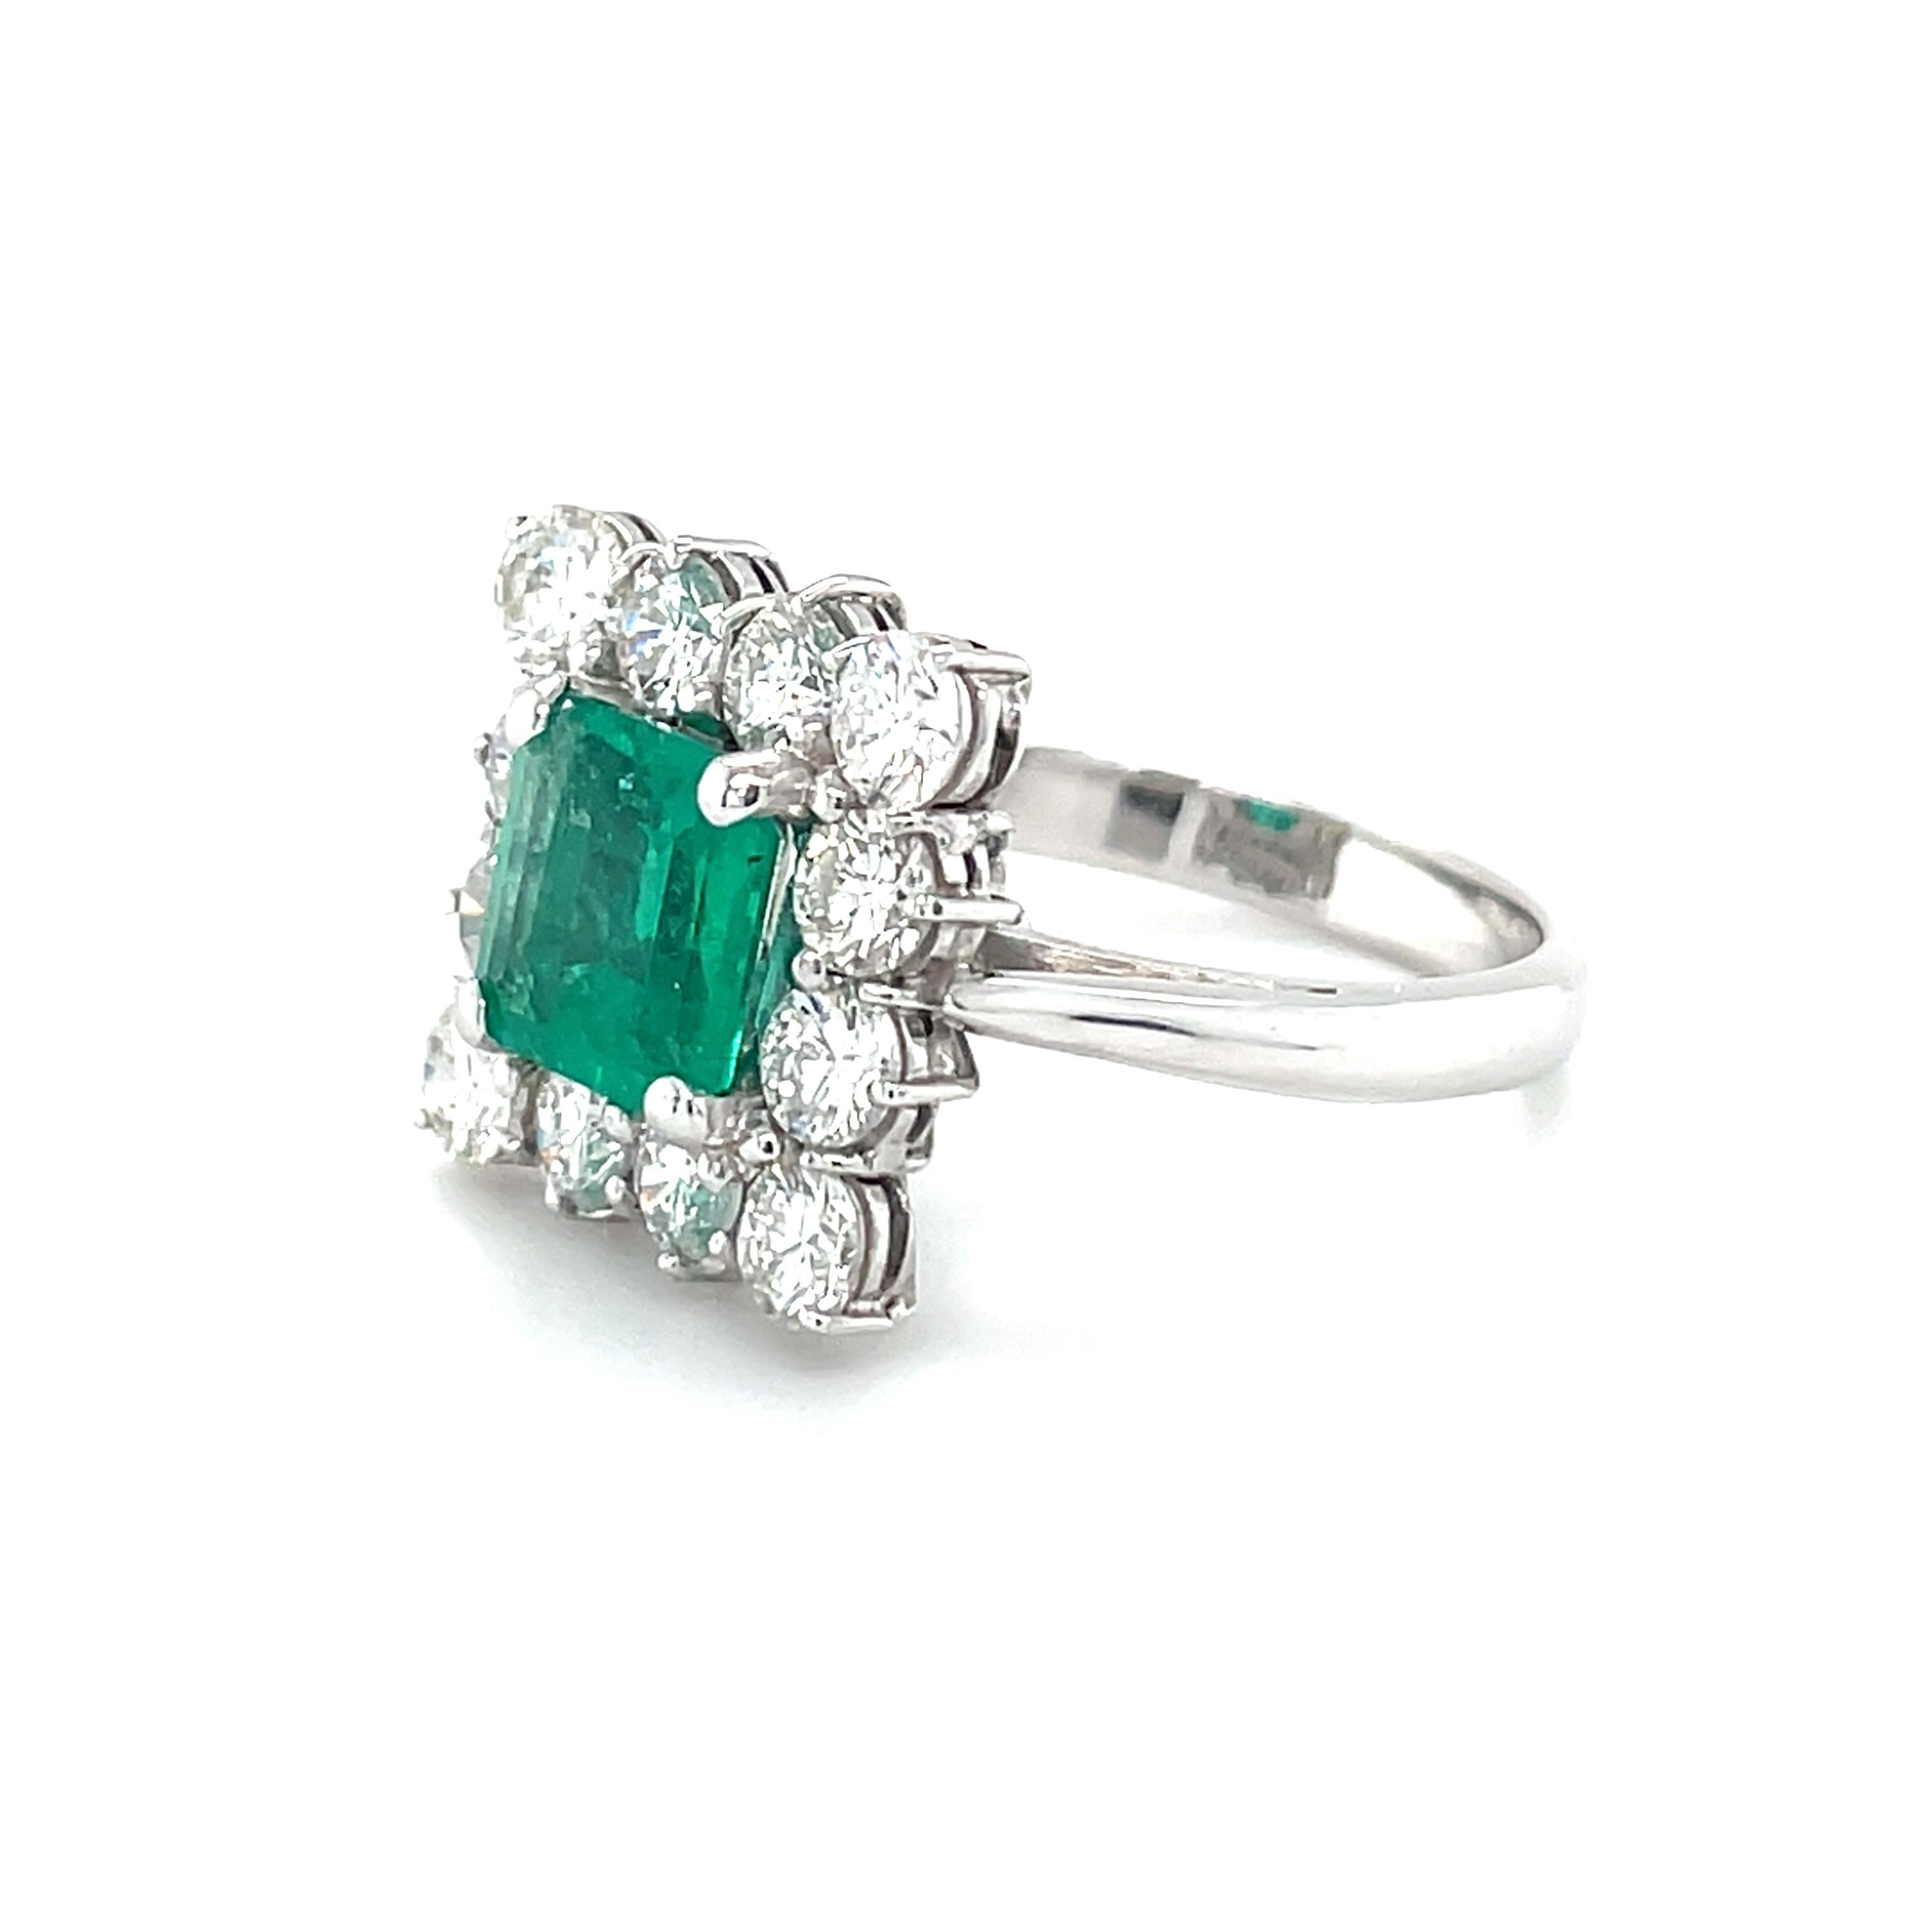 Contemporary 18 Karat White Gold Square Cut Emerald Diamond Cocktail Ring For Sale